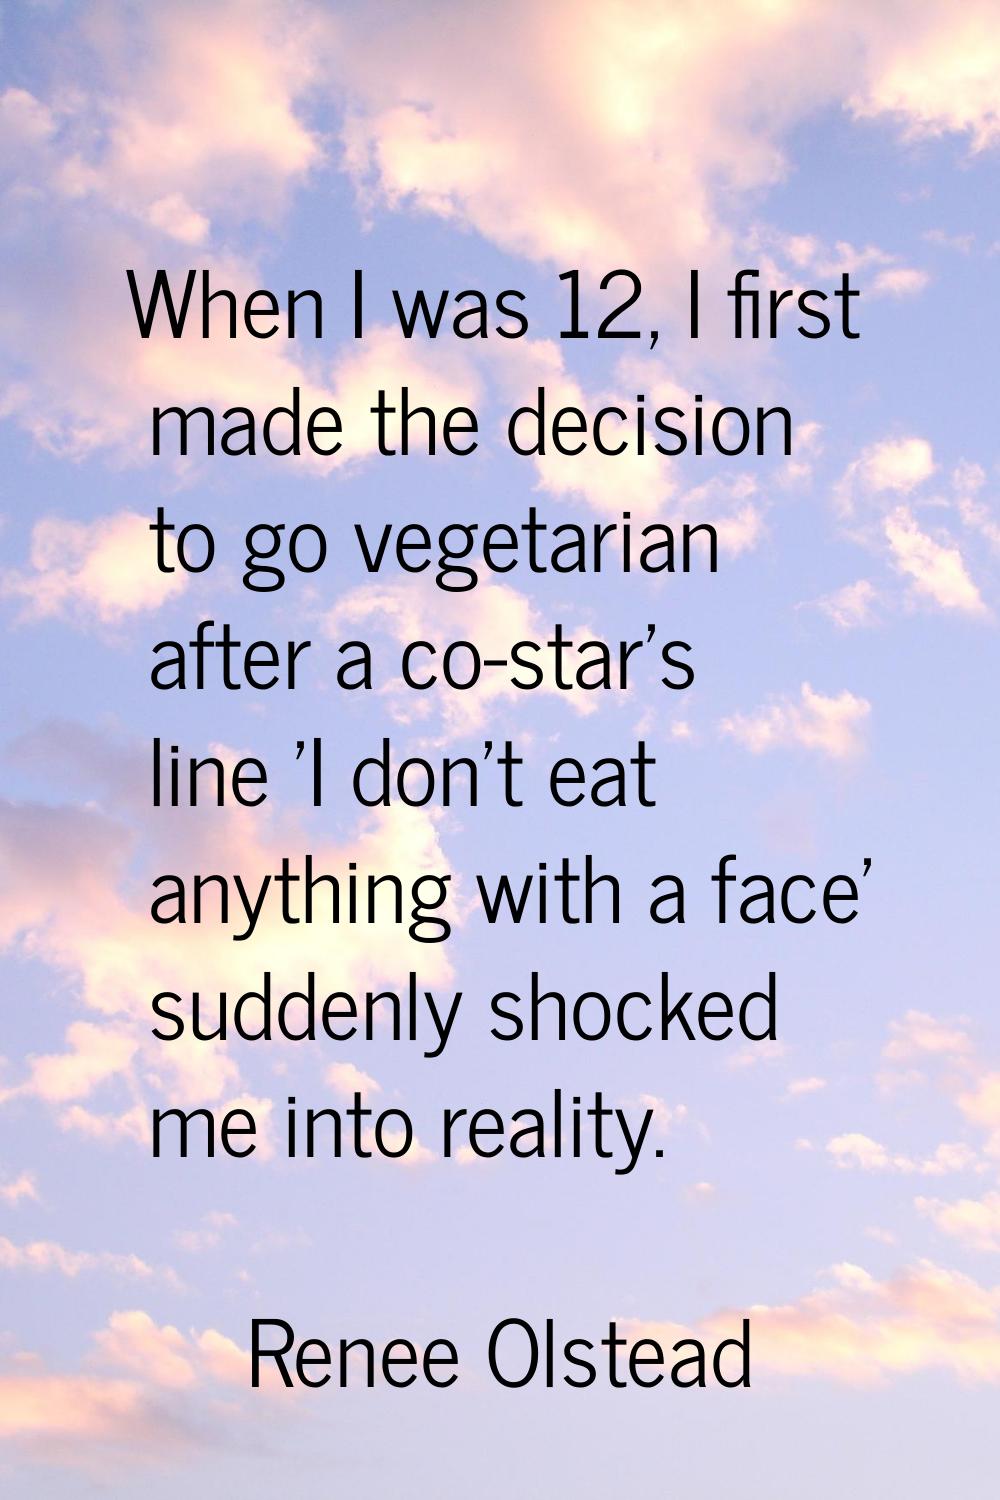 When I was 12, I first made the decision to go vegetarian after a co-star's line 'I don't eat anyth